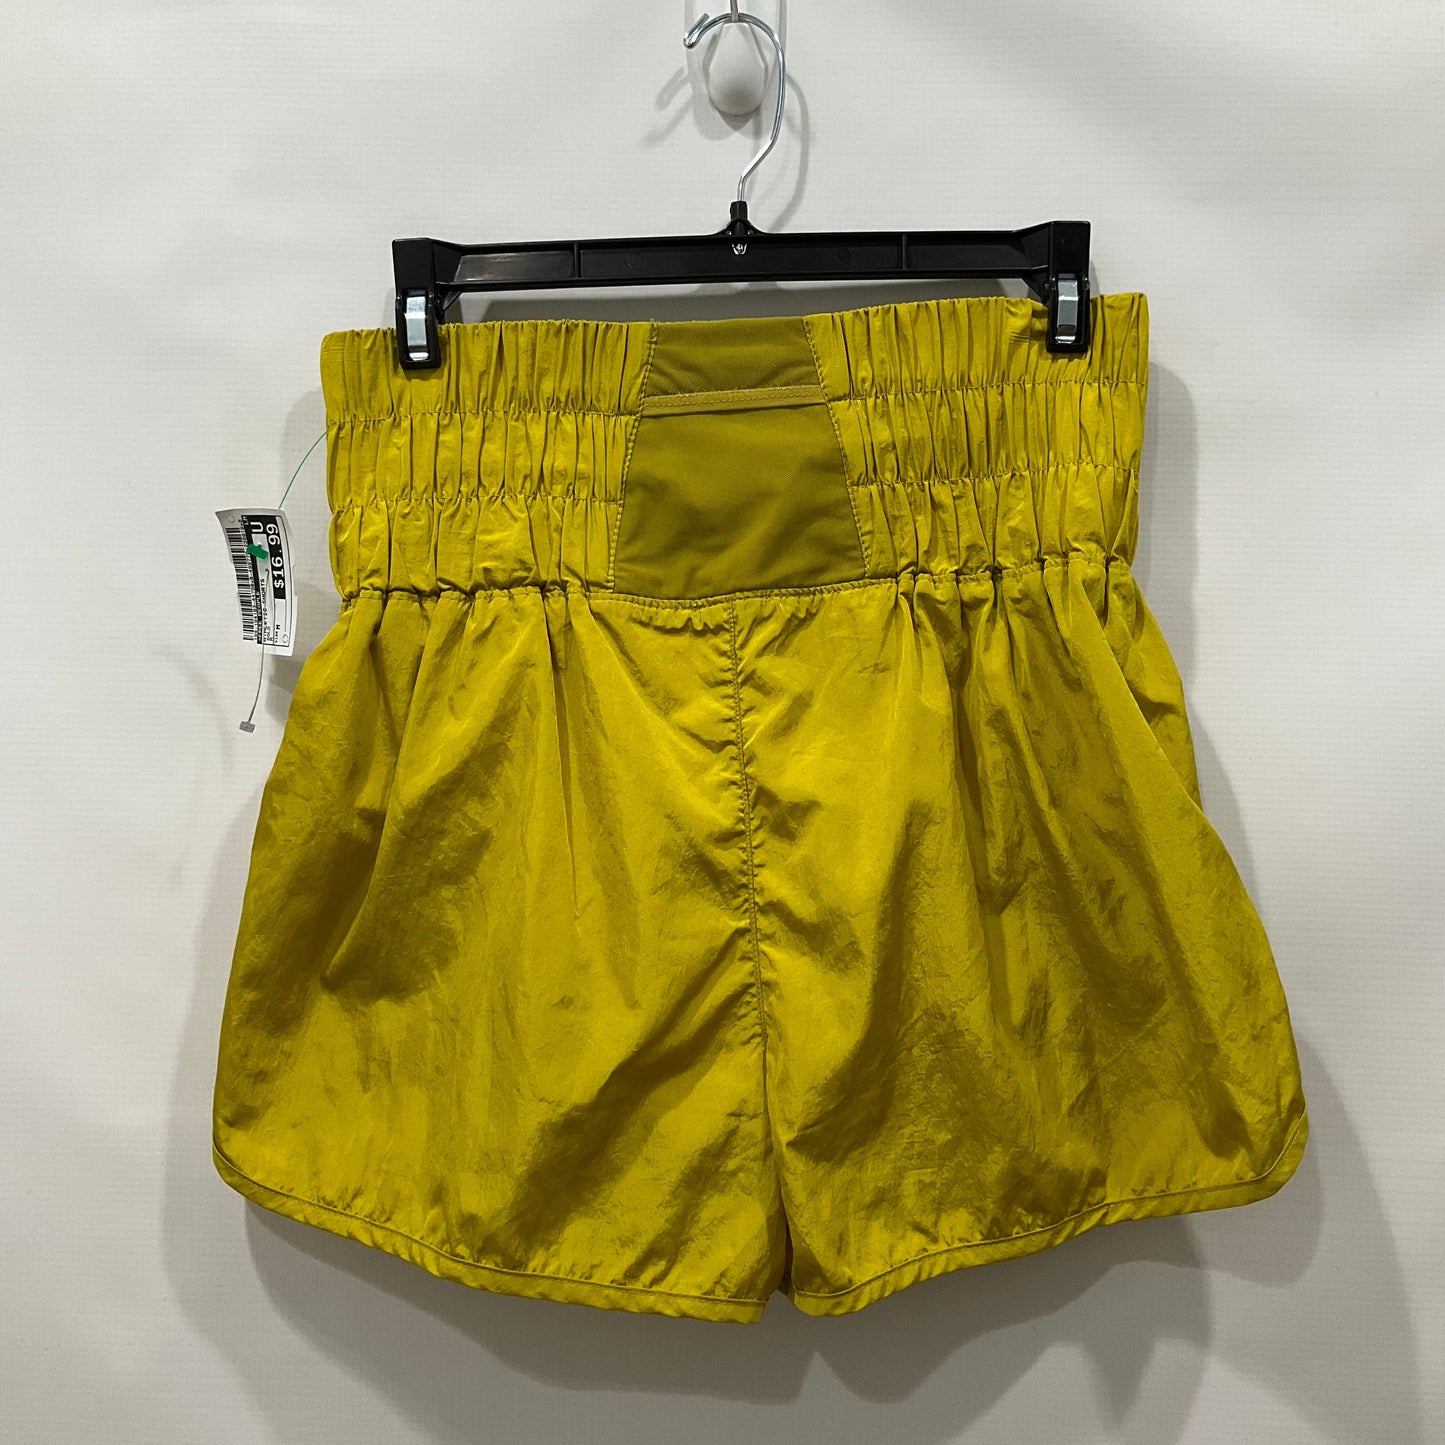 Gold Athletic Shorts Free People, Size M